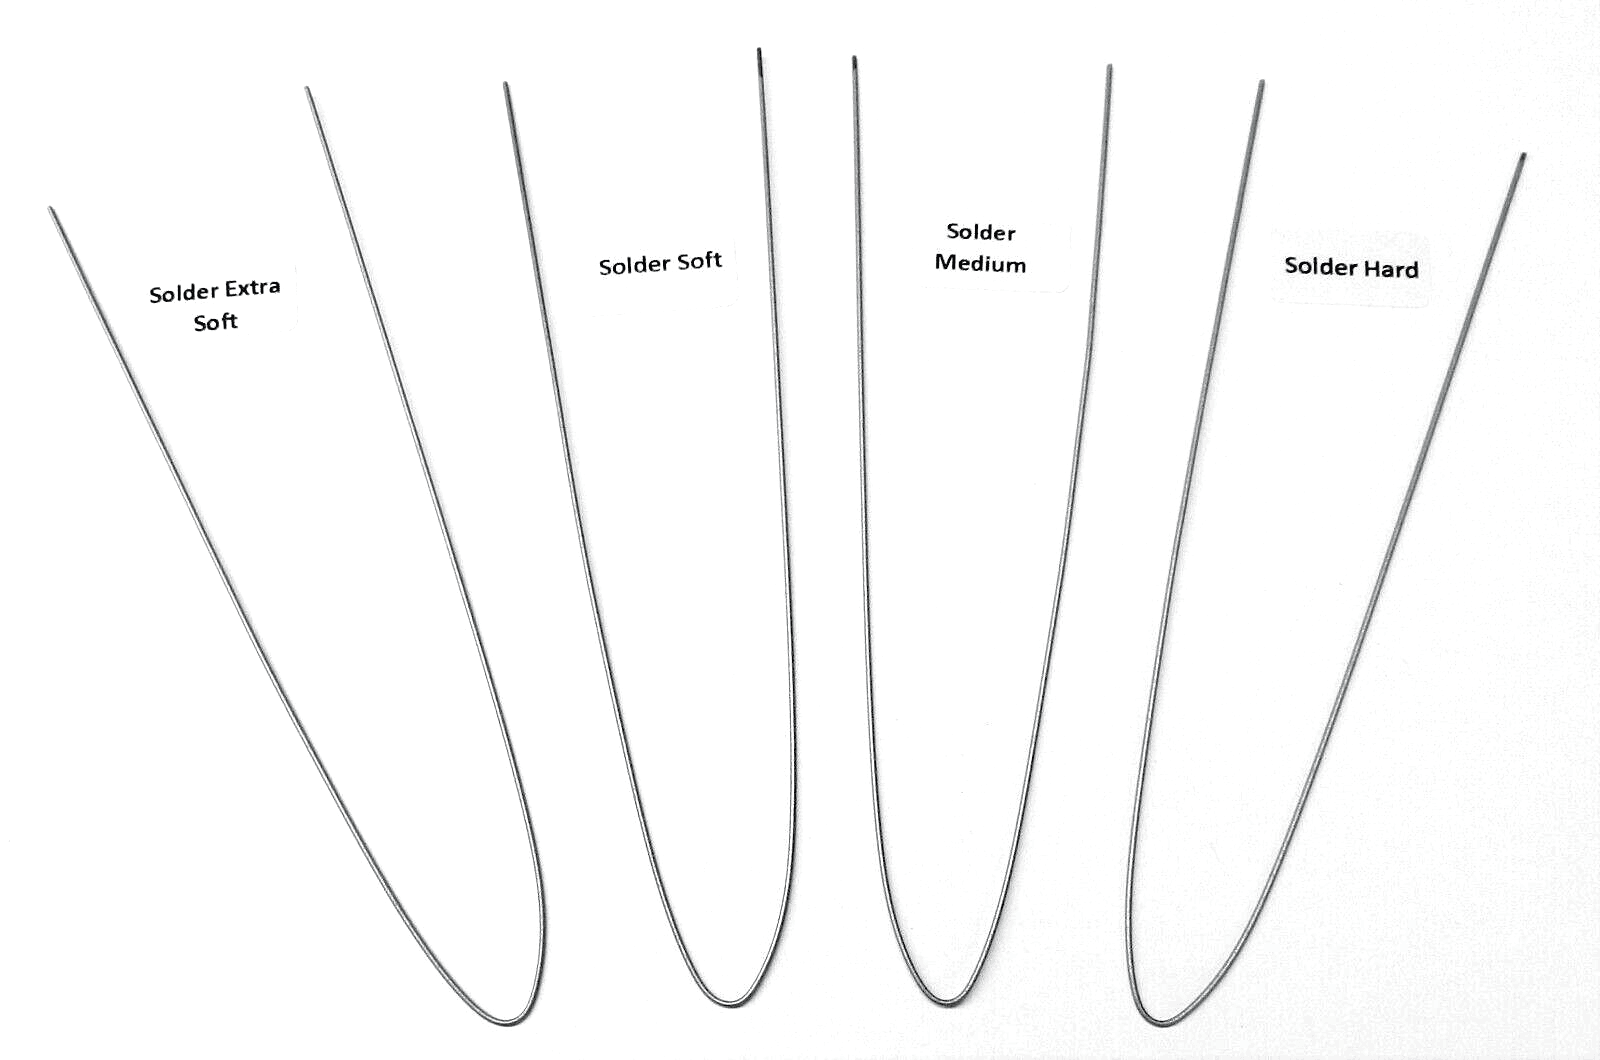 Four different types of flower stems are shown on a white background.